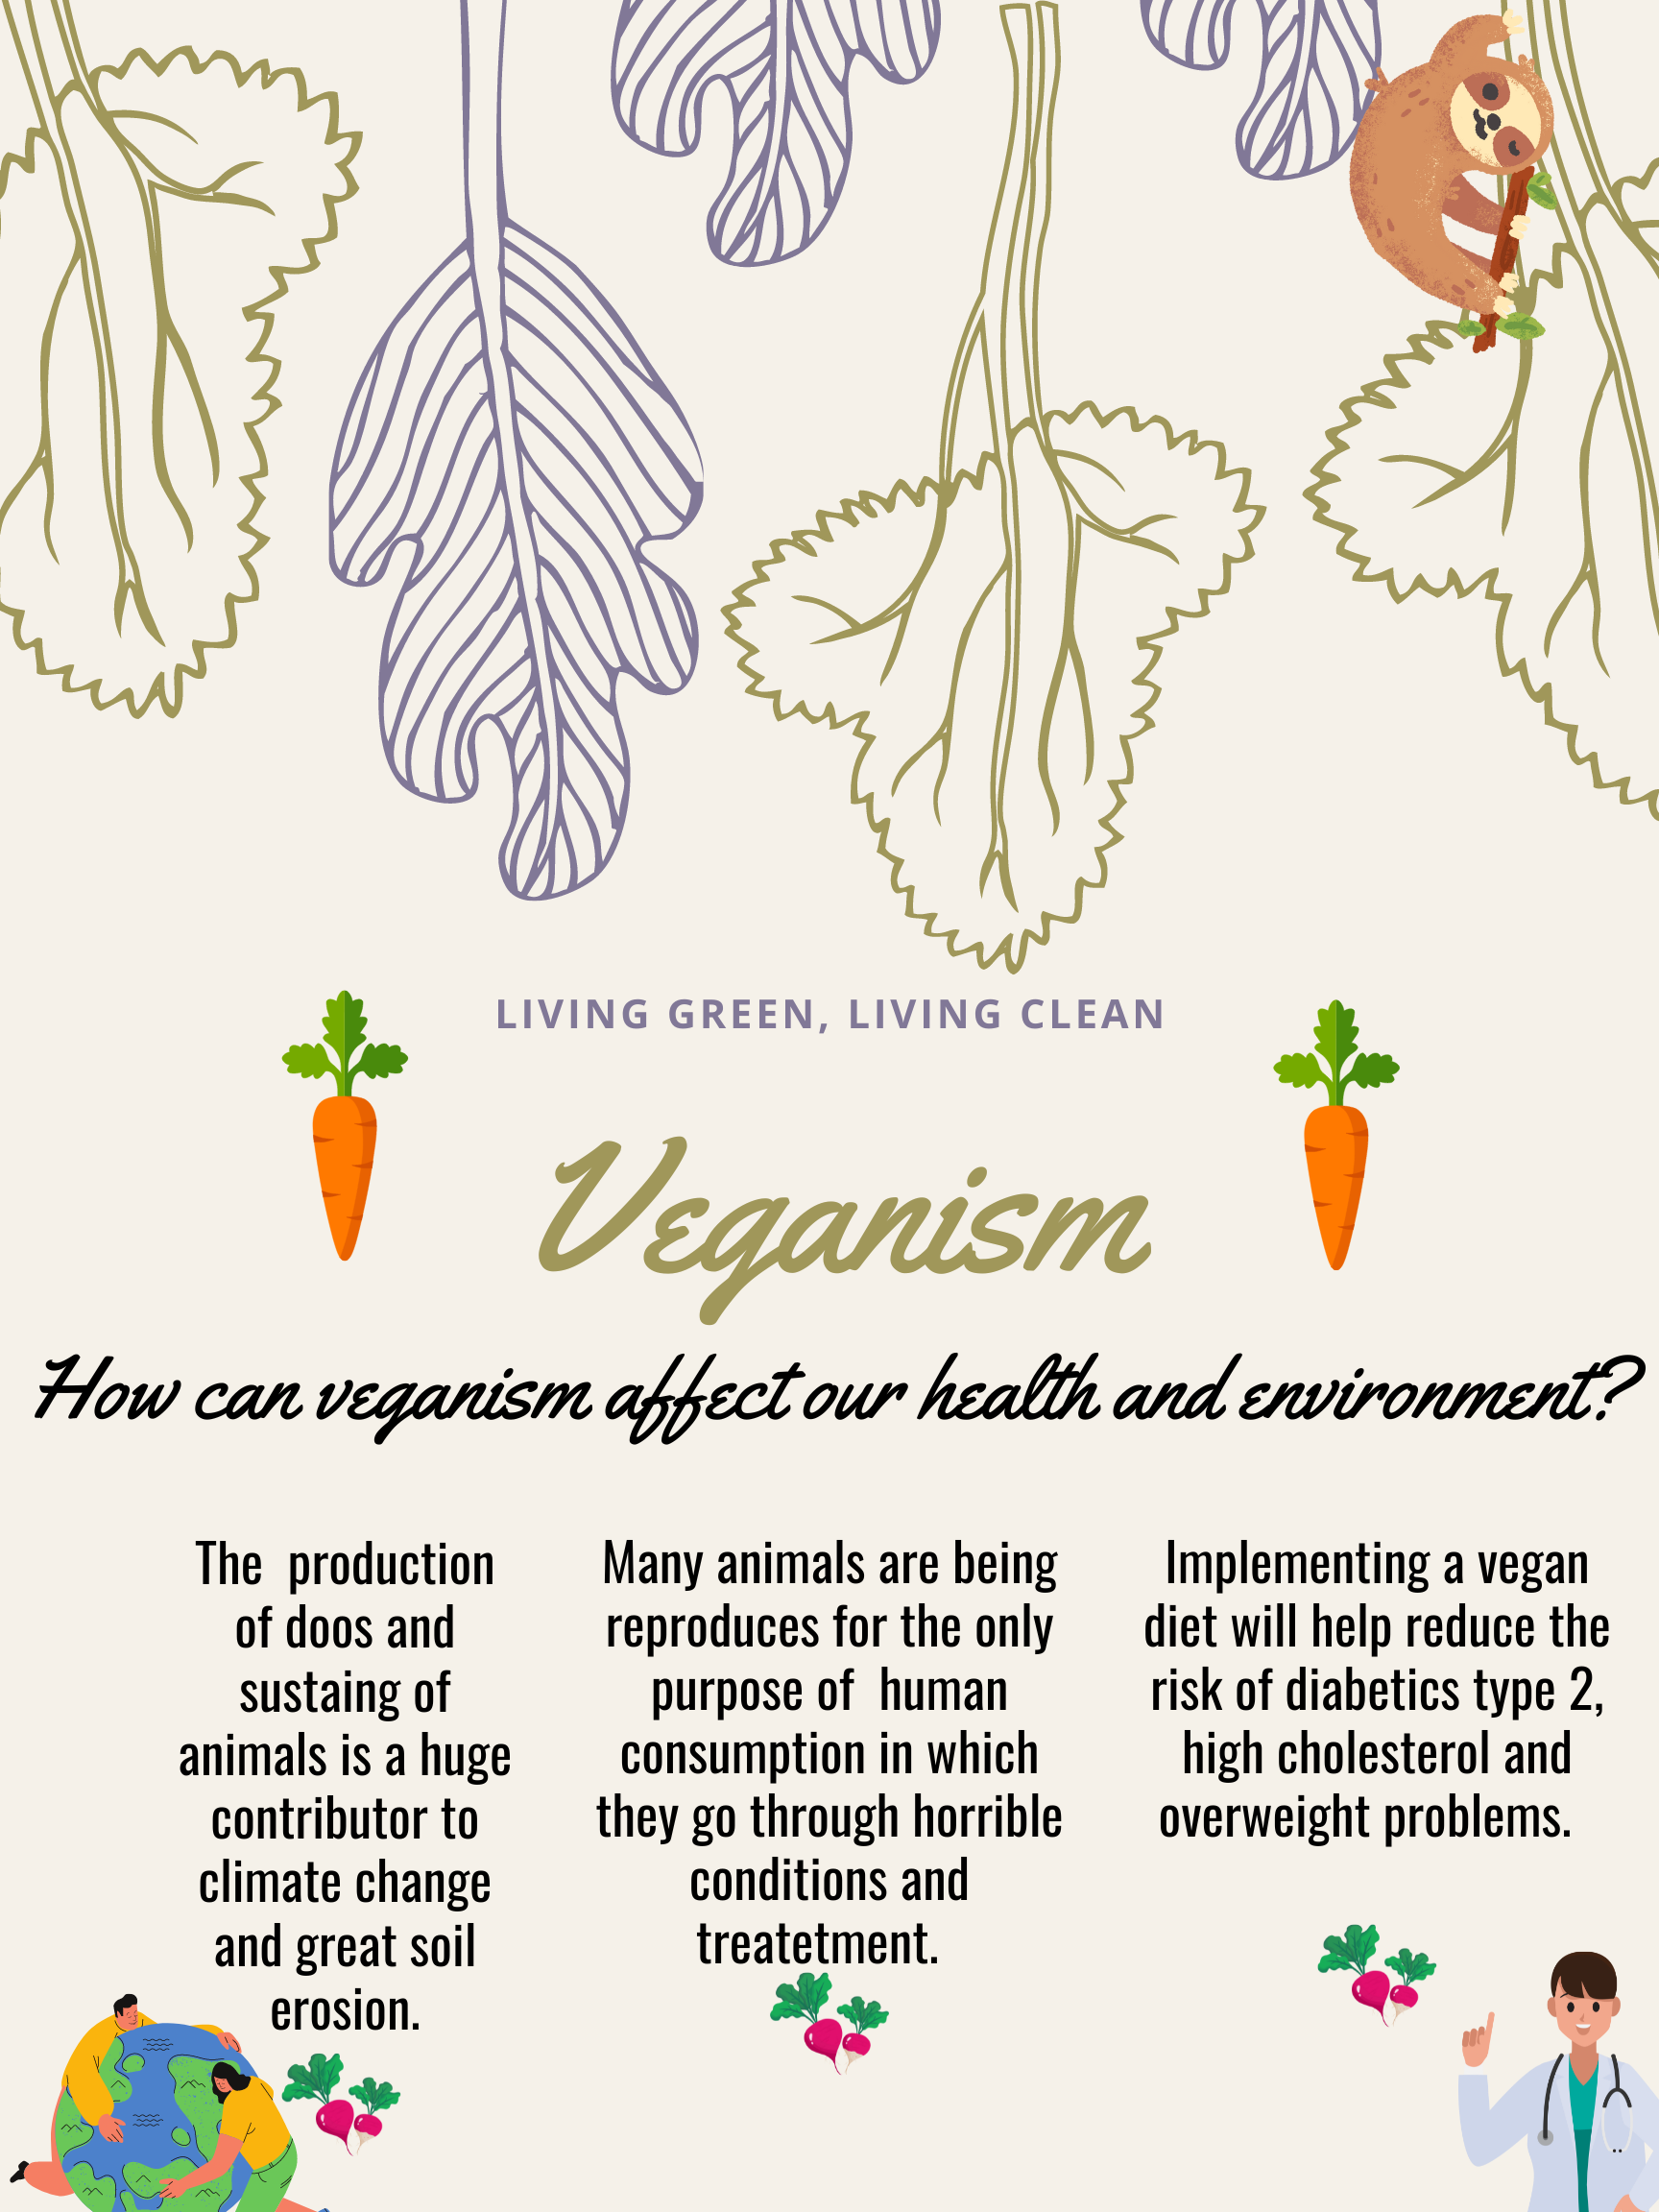 Visual Presentation by Nidia Saenz The project Name is How can veganism affect our health and environment question mark